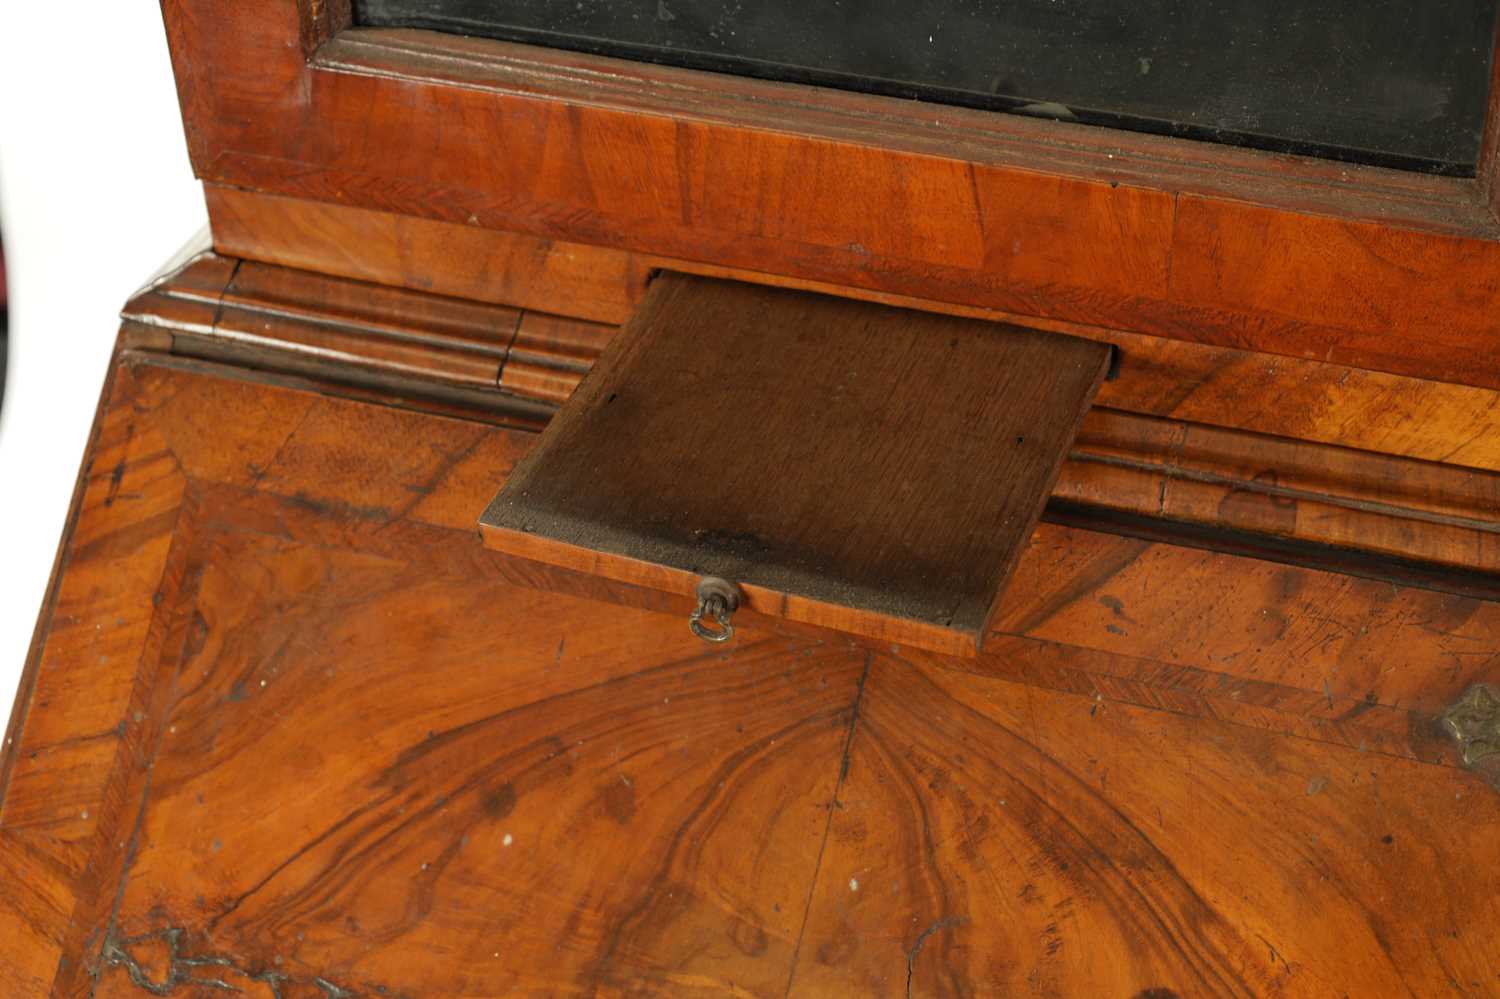 AN EARLY 18TH CENTURY FIGURED WALNUT AND OAK BREAK ARCHED TOP BUREAU BOOKCASE - Image 4 of 10